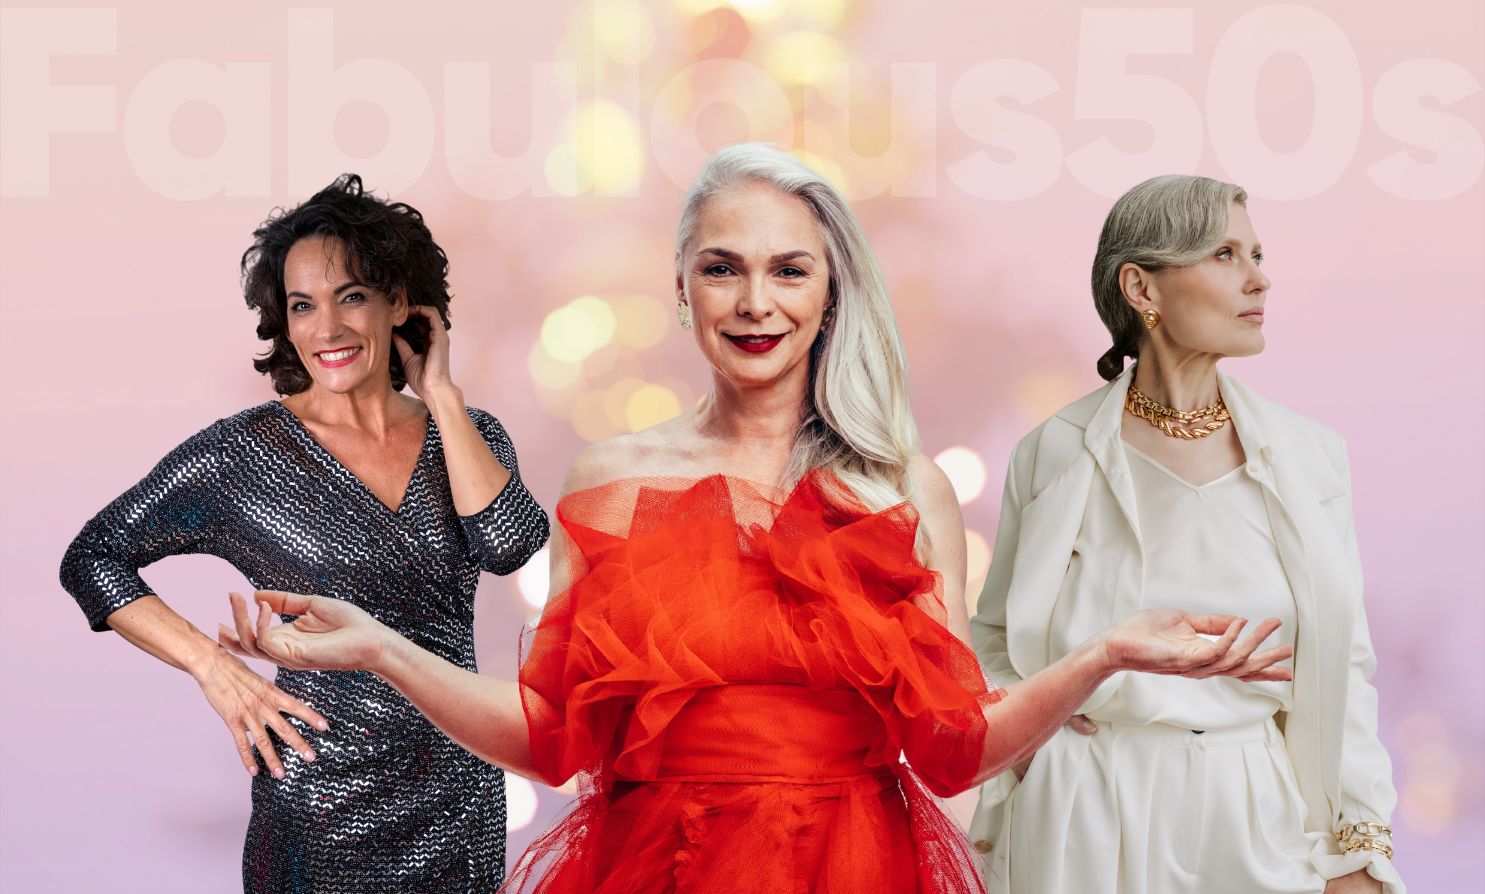 Holiday Style Tips, showcasing beautiful Christmas outfits tailored for women over 50.